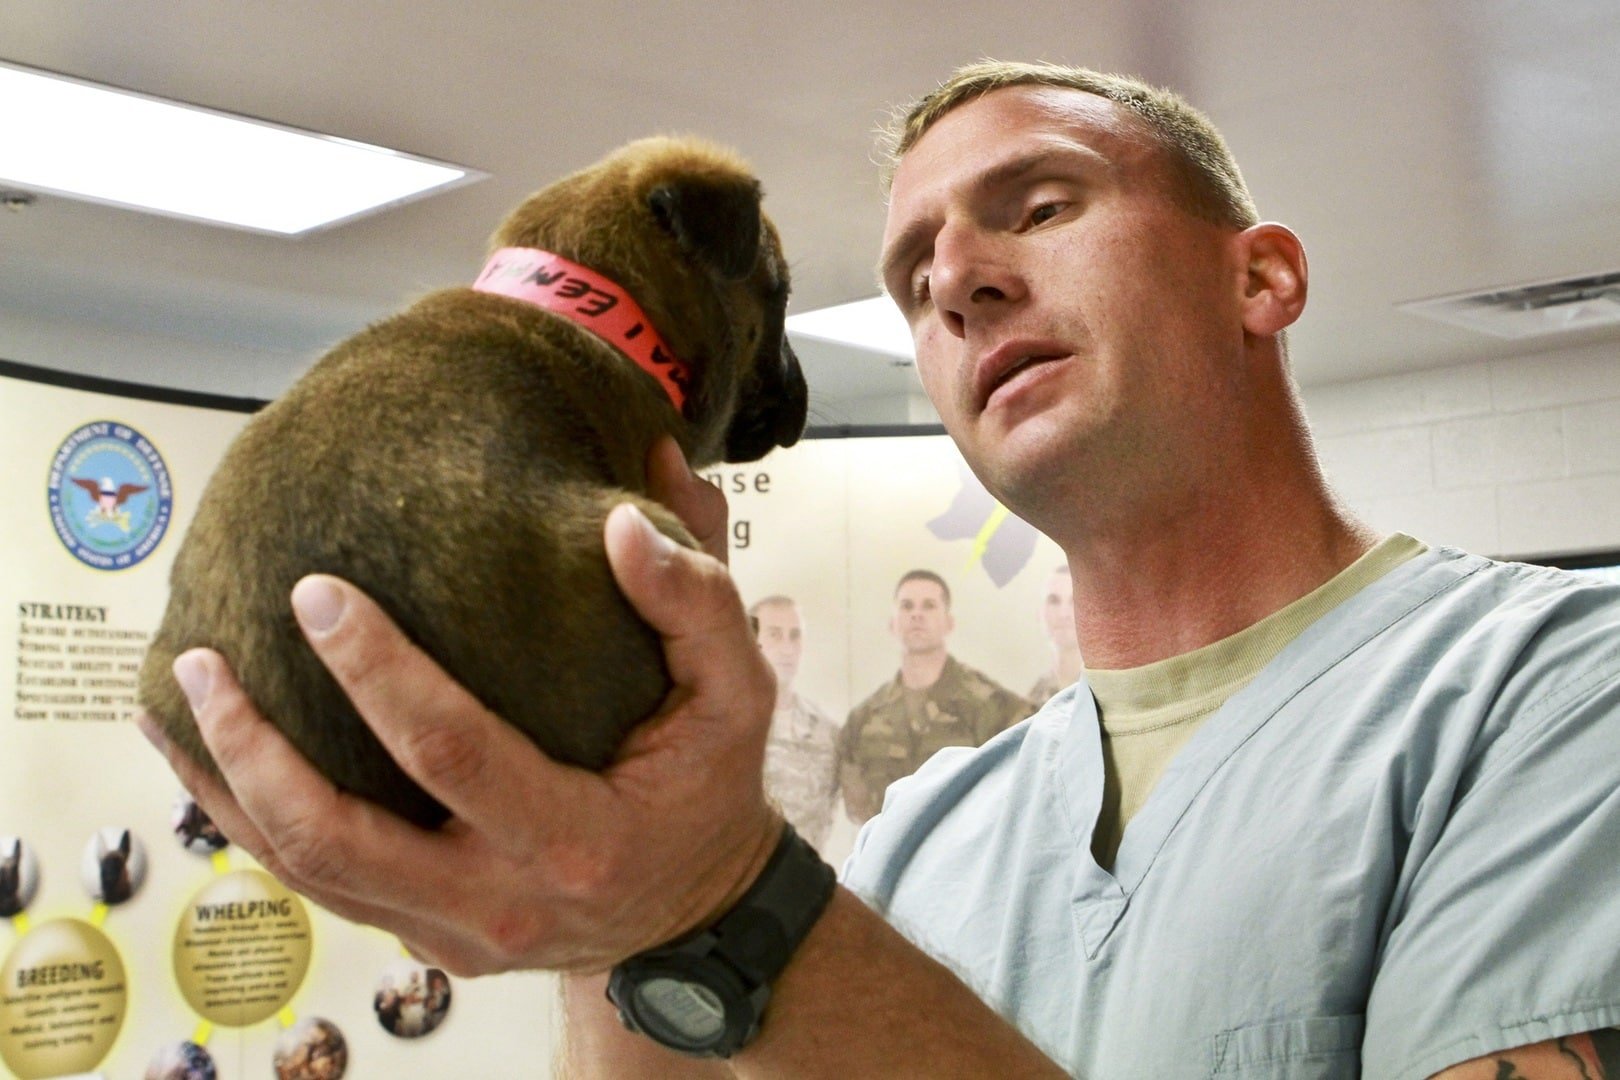 dog getting examined by the vet